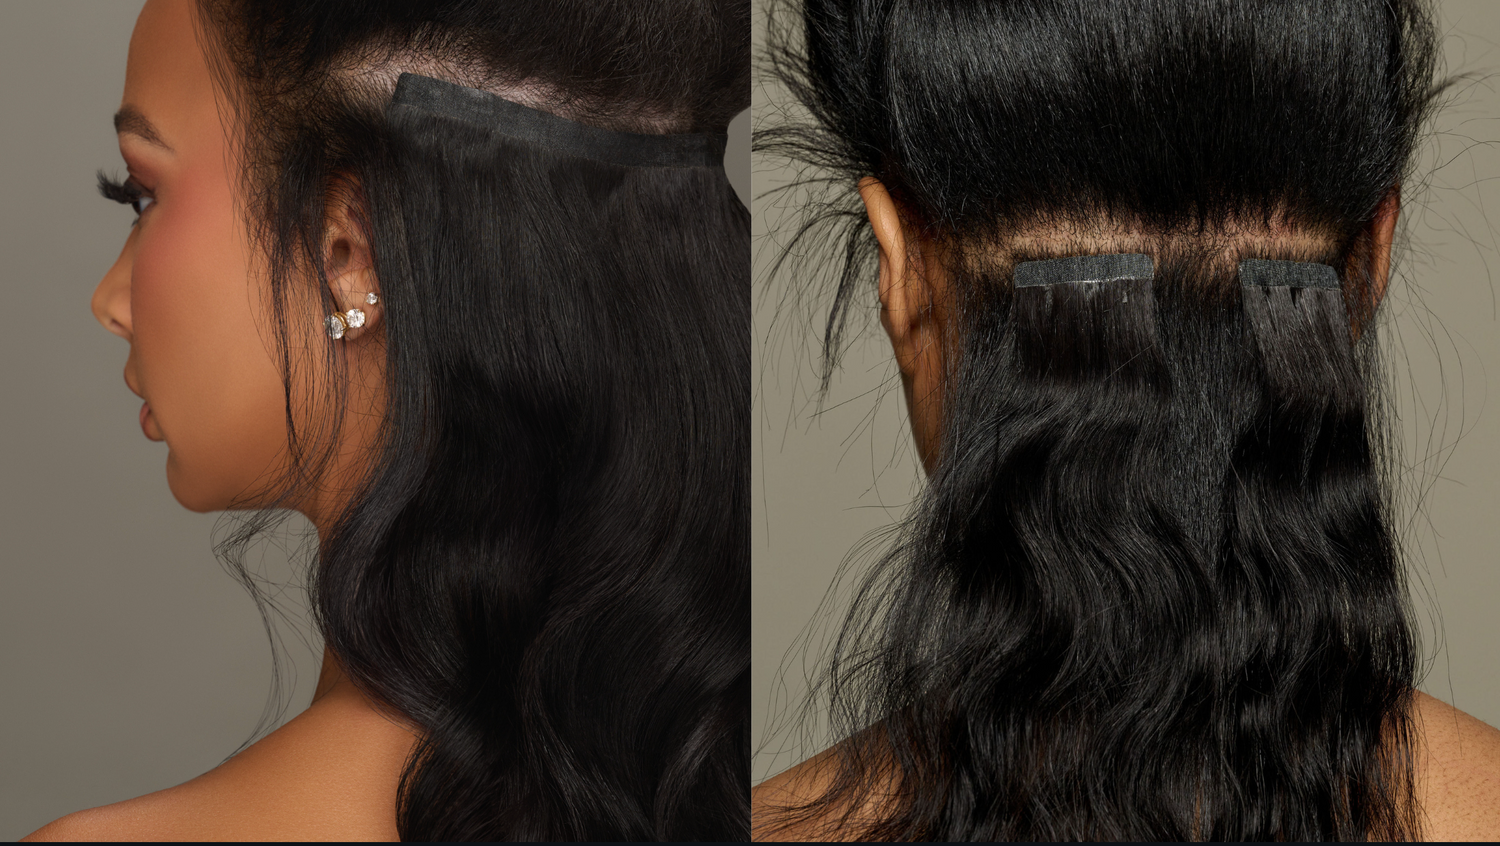 The #1 Hair Extension that Grows Your Natural Hair